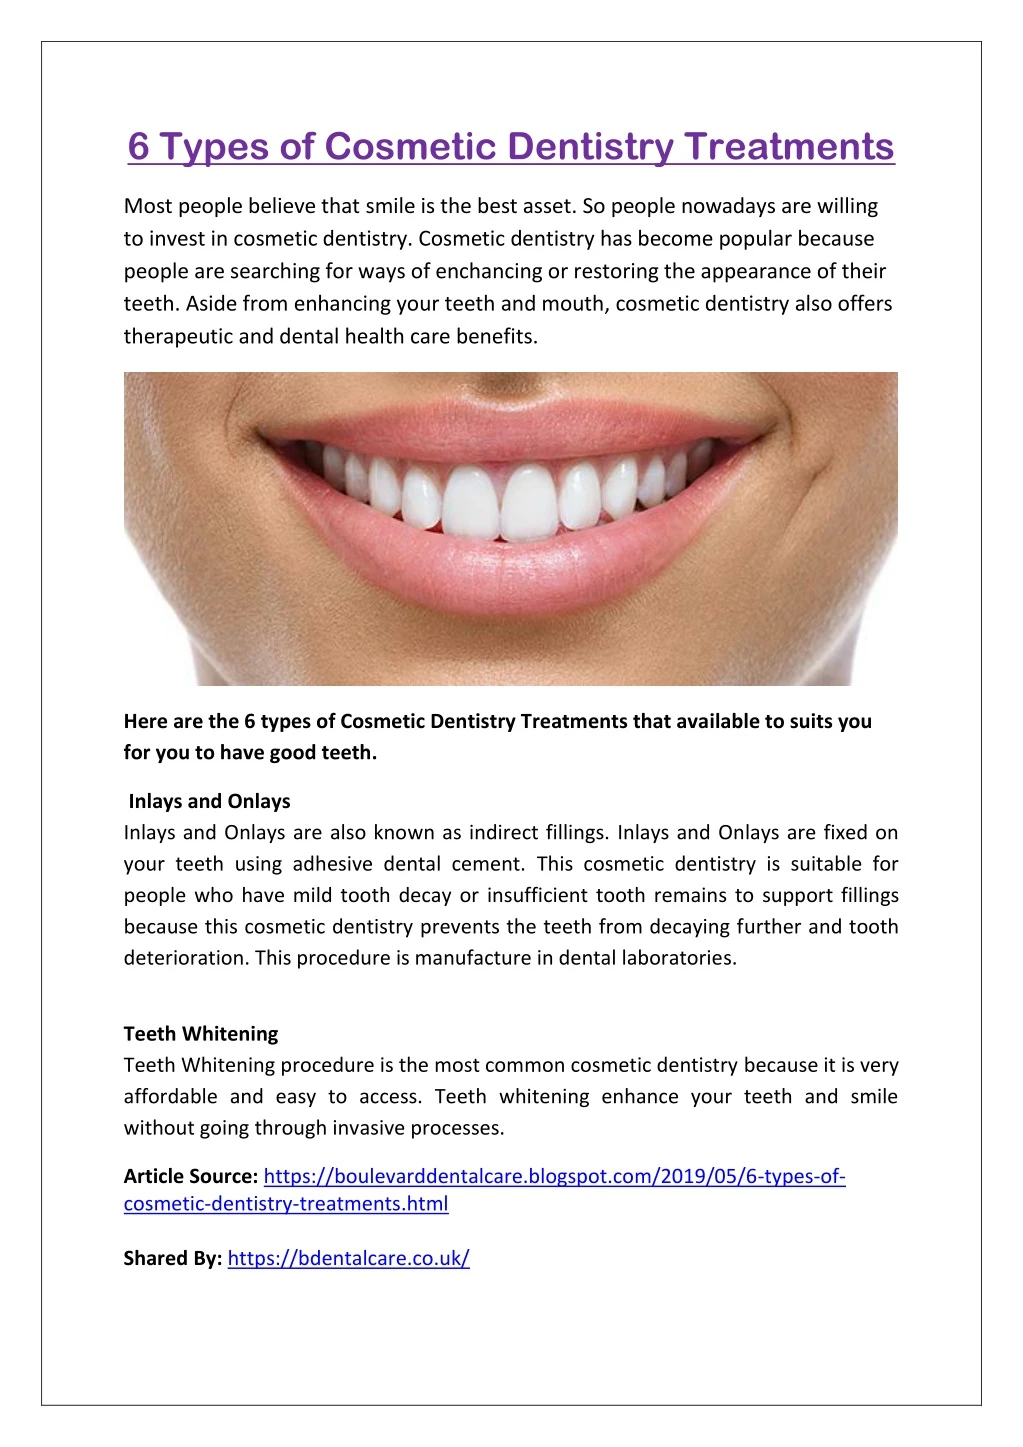 6 types of cosmetic dentistry treatments